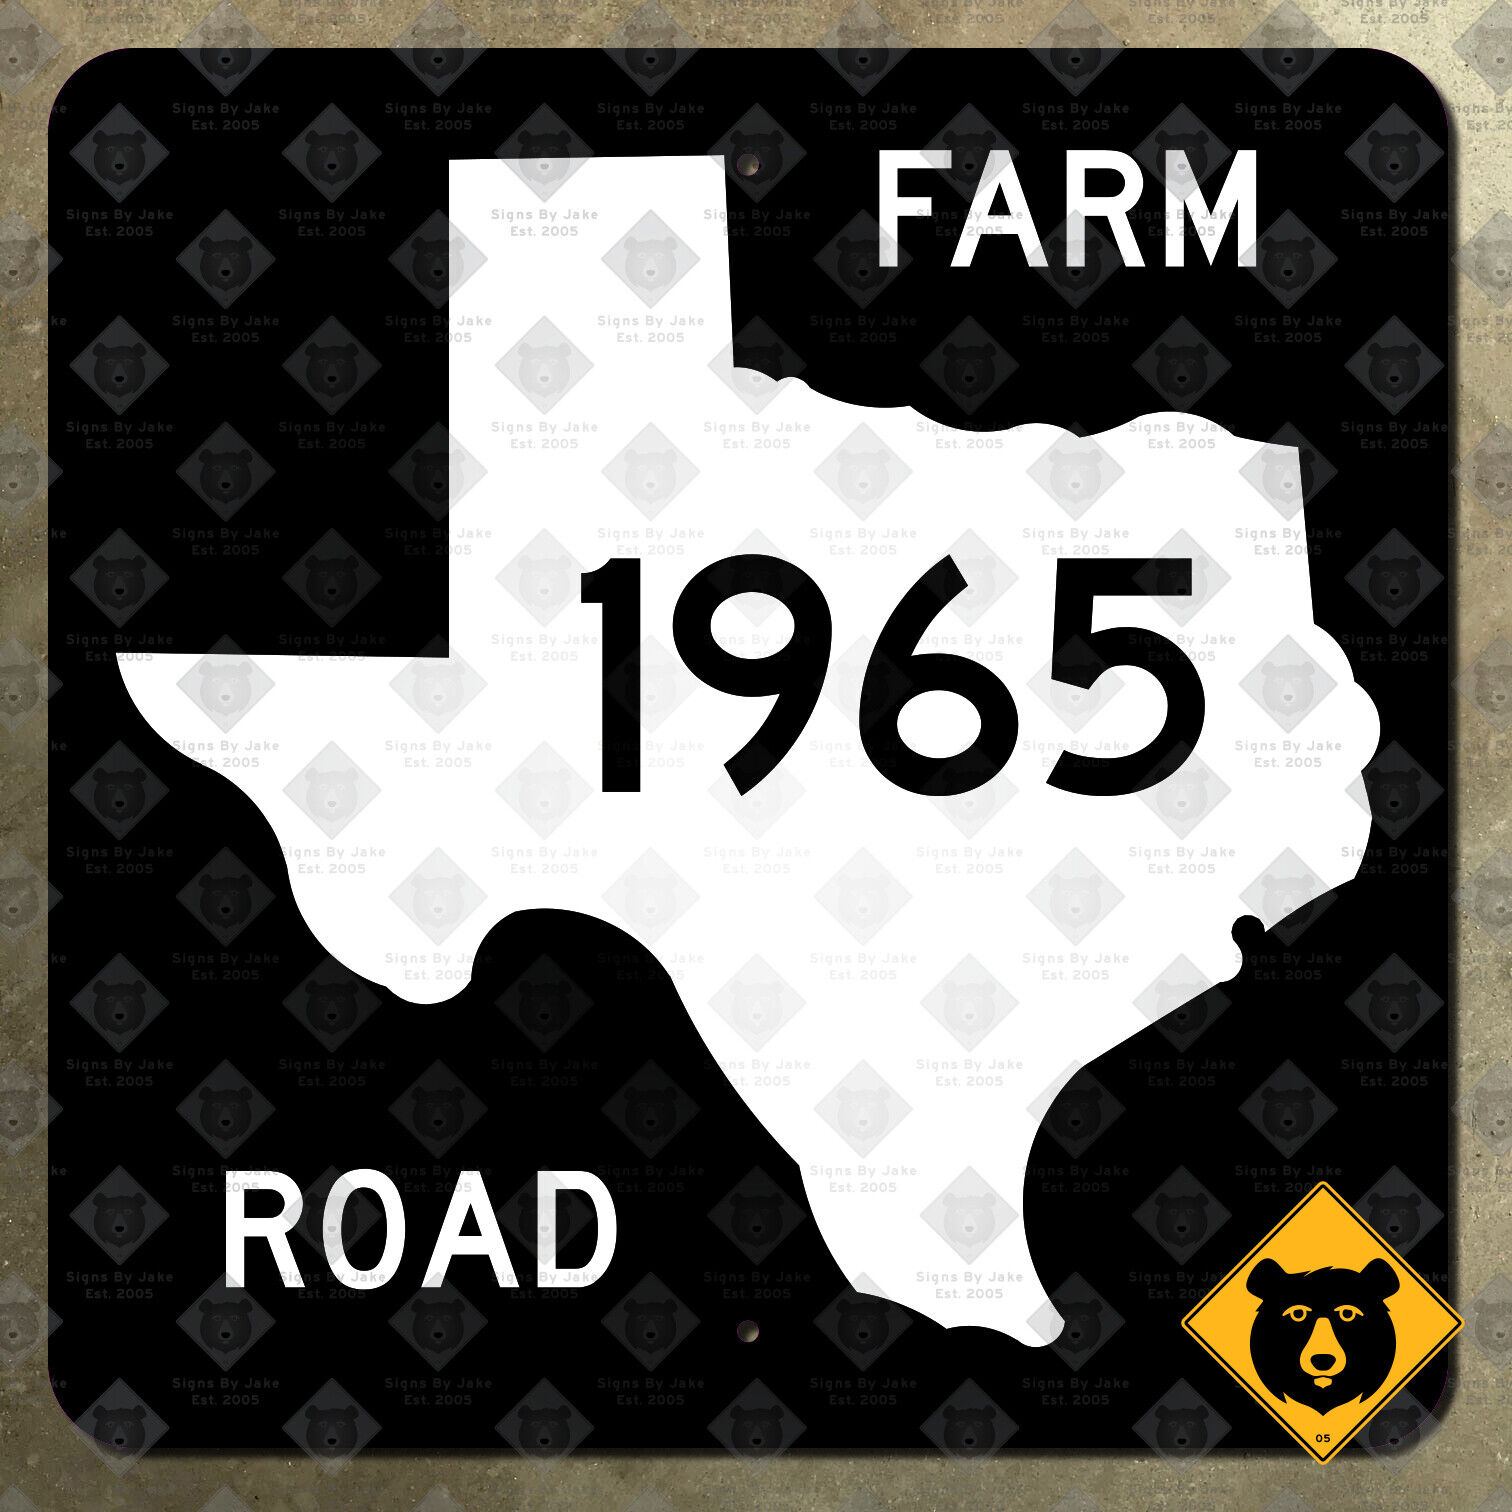 Texas farm to market route 1965 state highway marker road sign map 1965 12x12